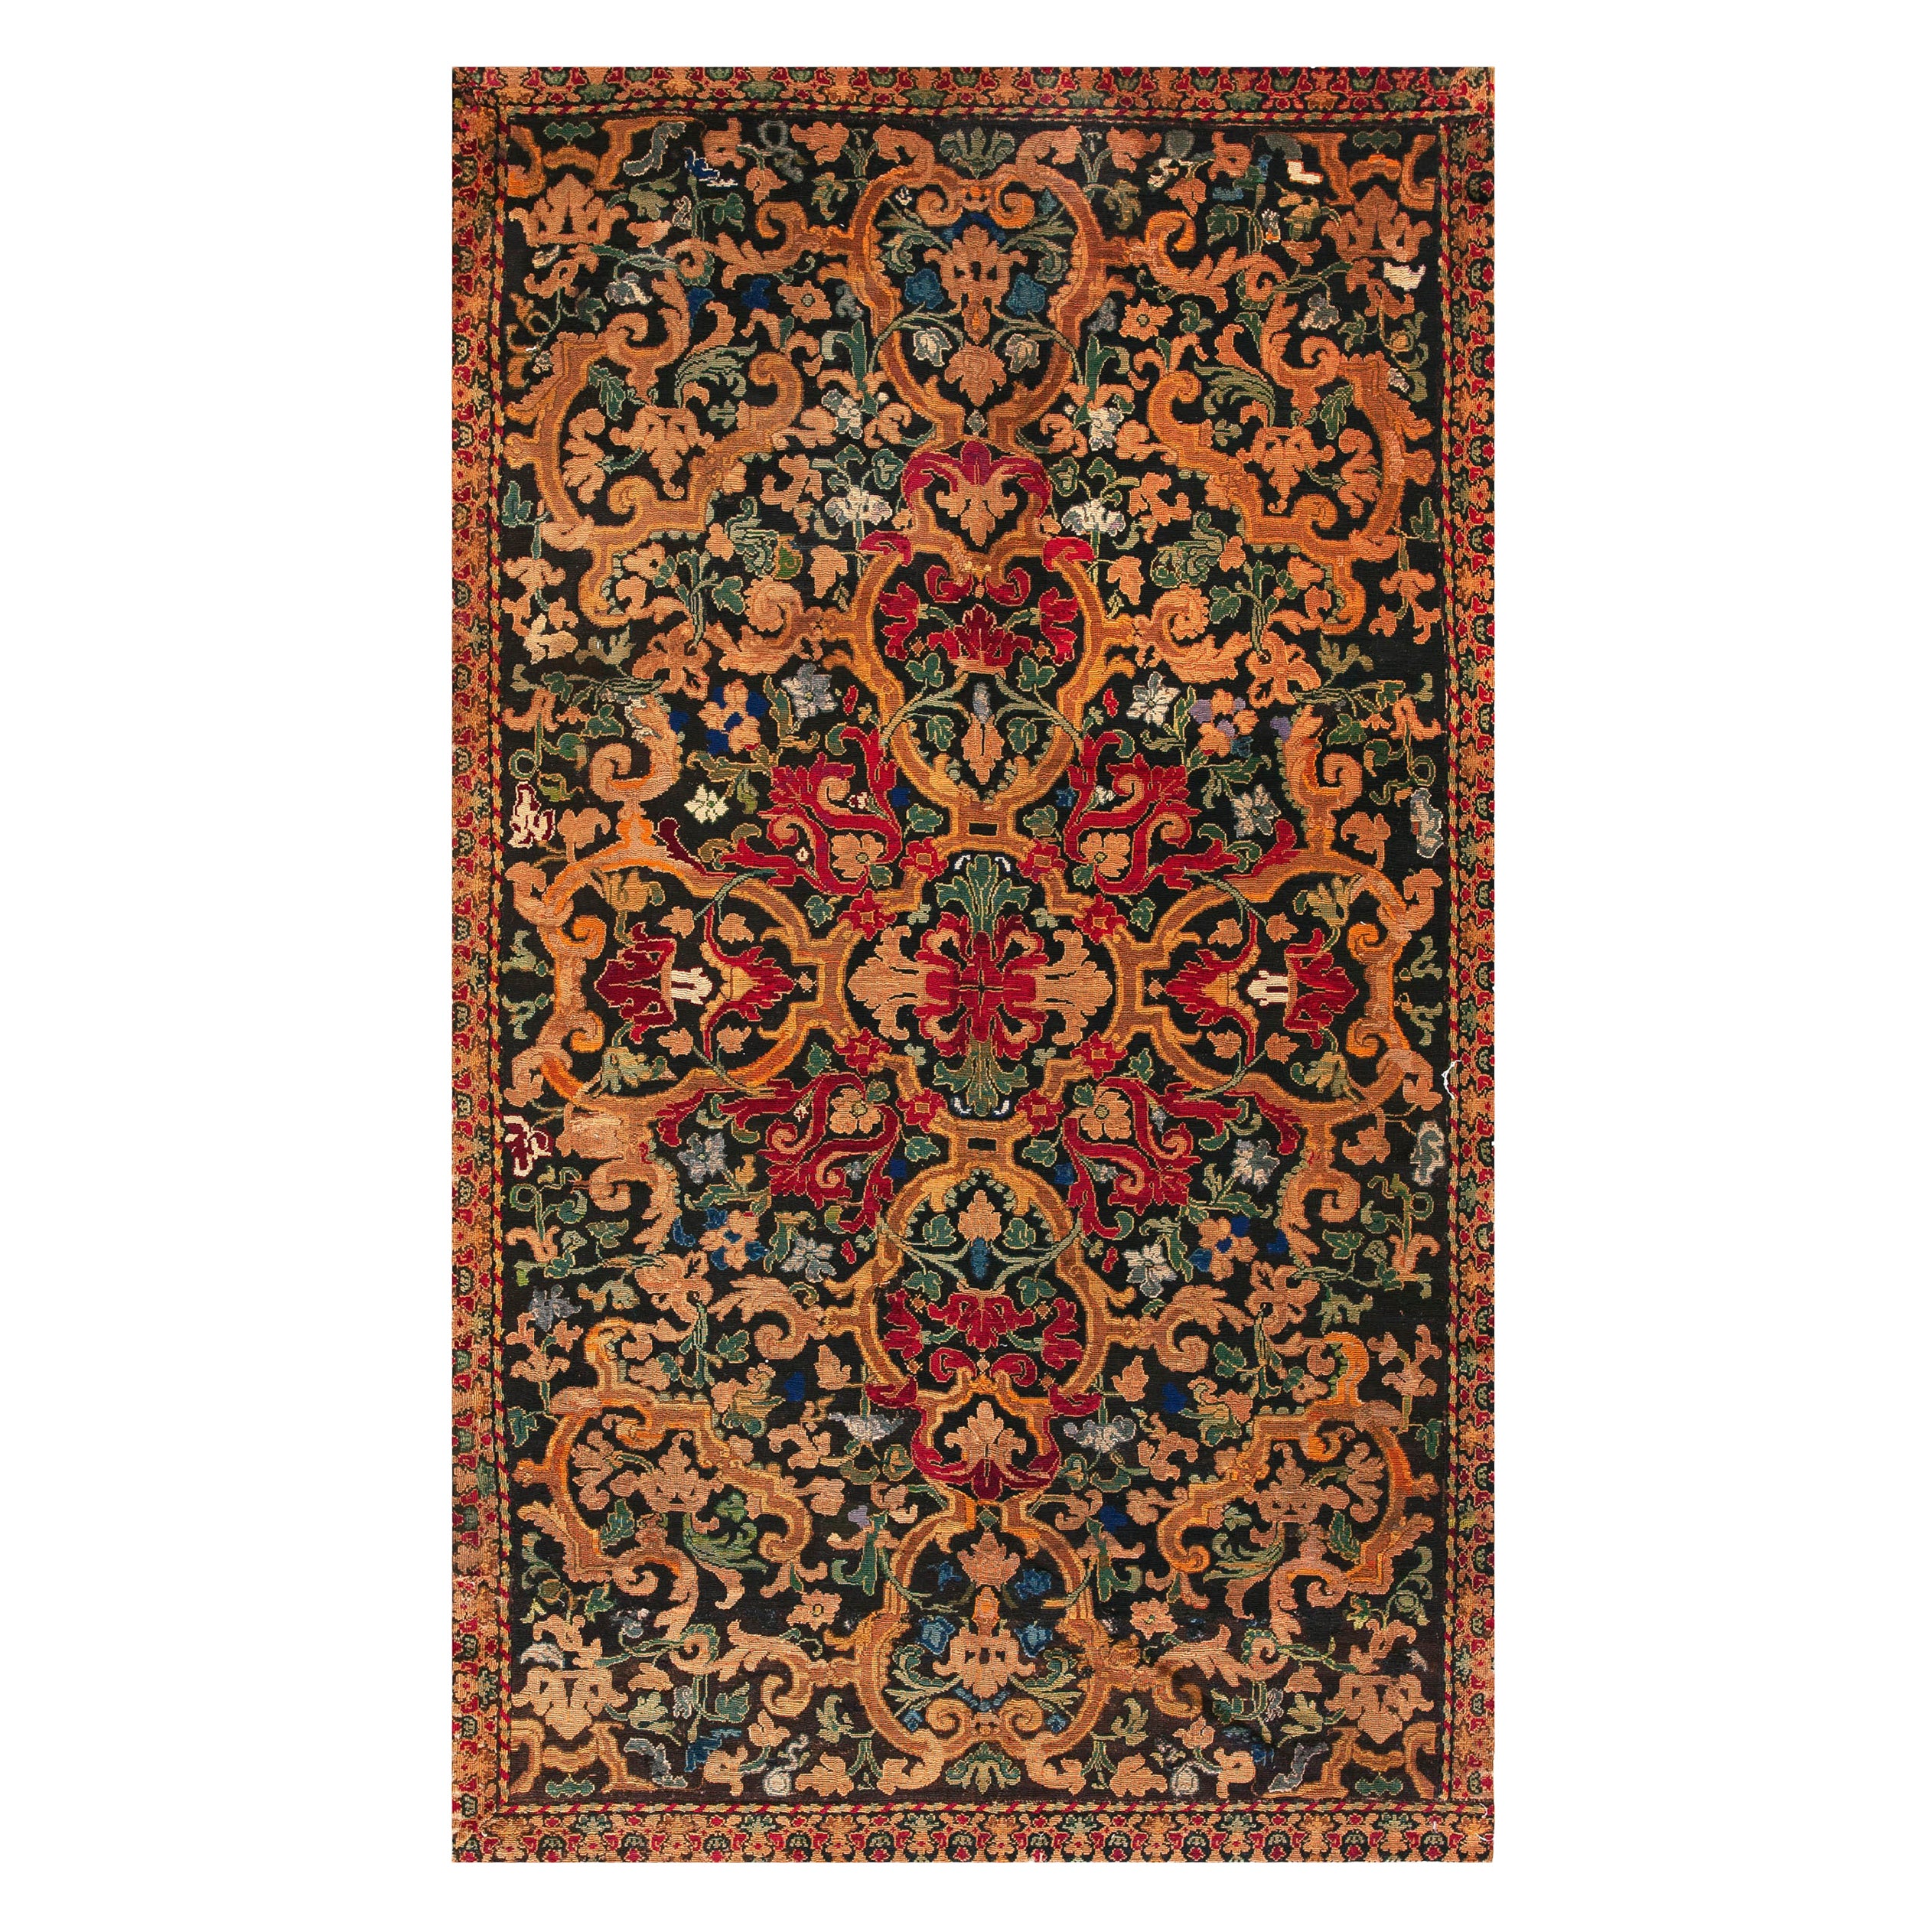 Mid 18th Century French Needlepoint Carpet ( 5' x 8 8'' - 152 x 264 ) For Sale